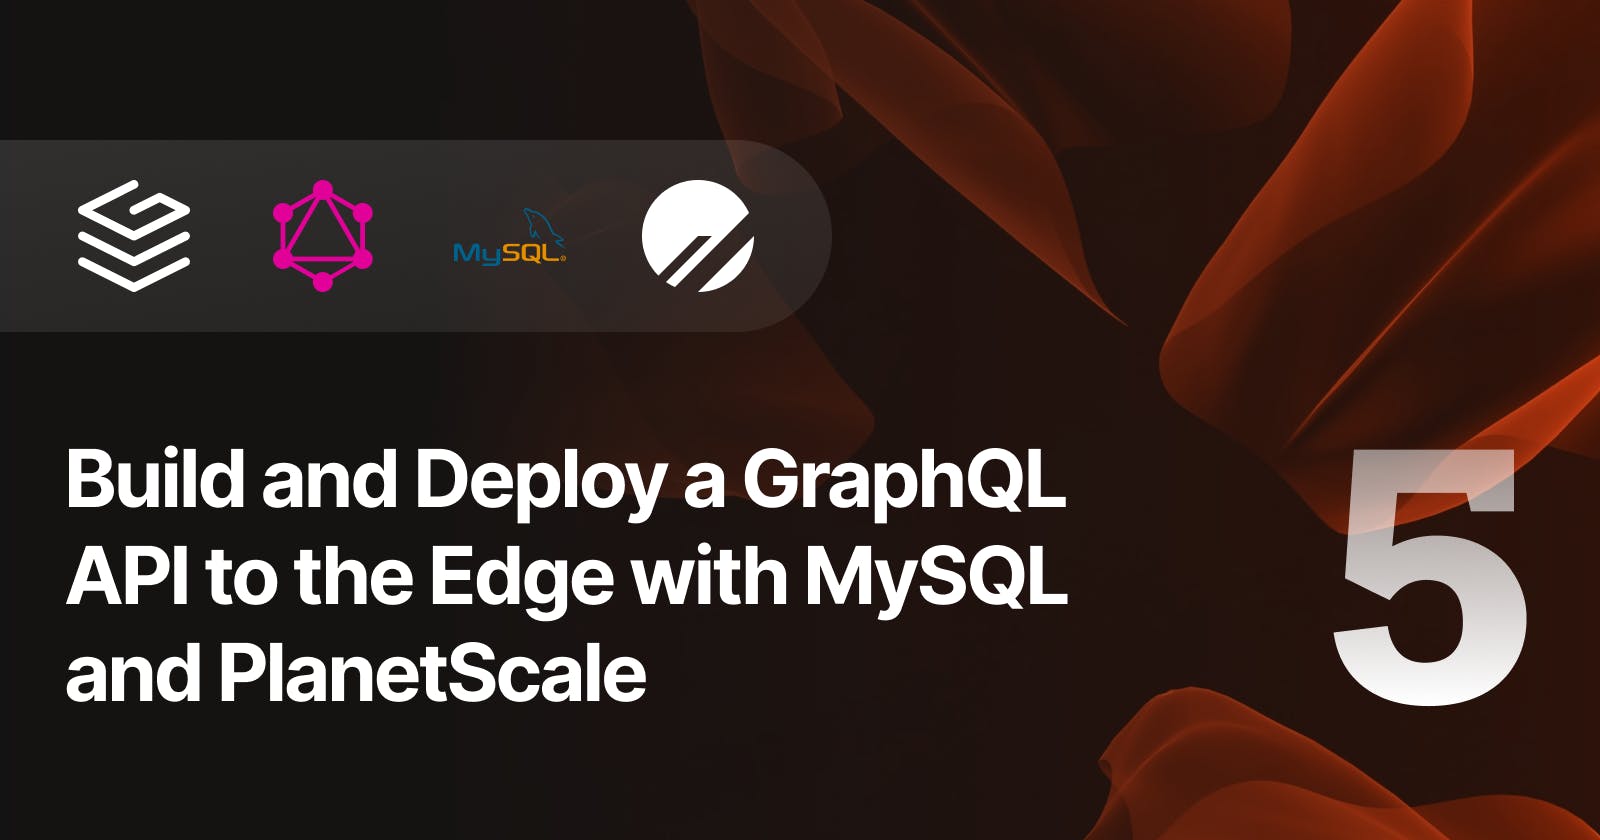 Build and Deploy a GraphQL API to the Edge with MySQL and PlanetScale — Part 5